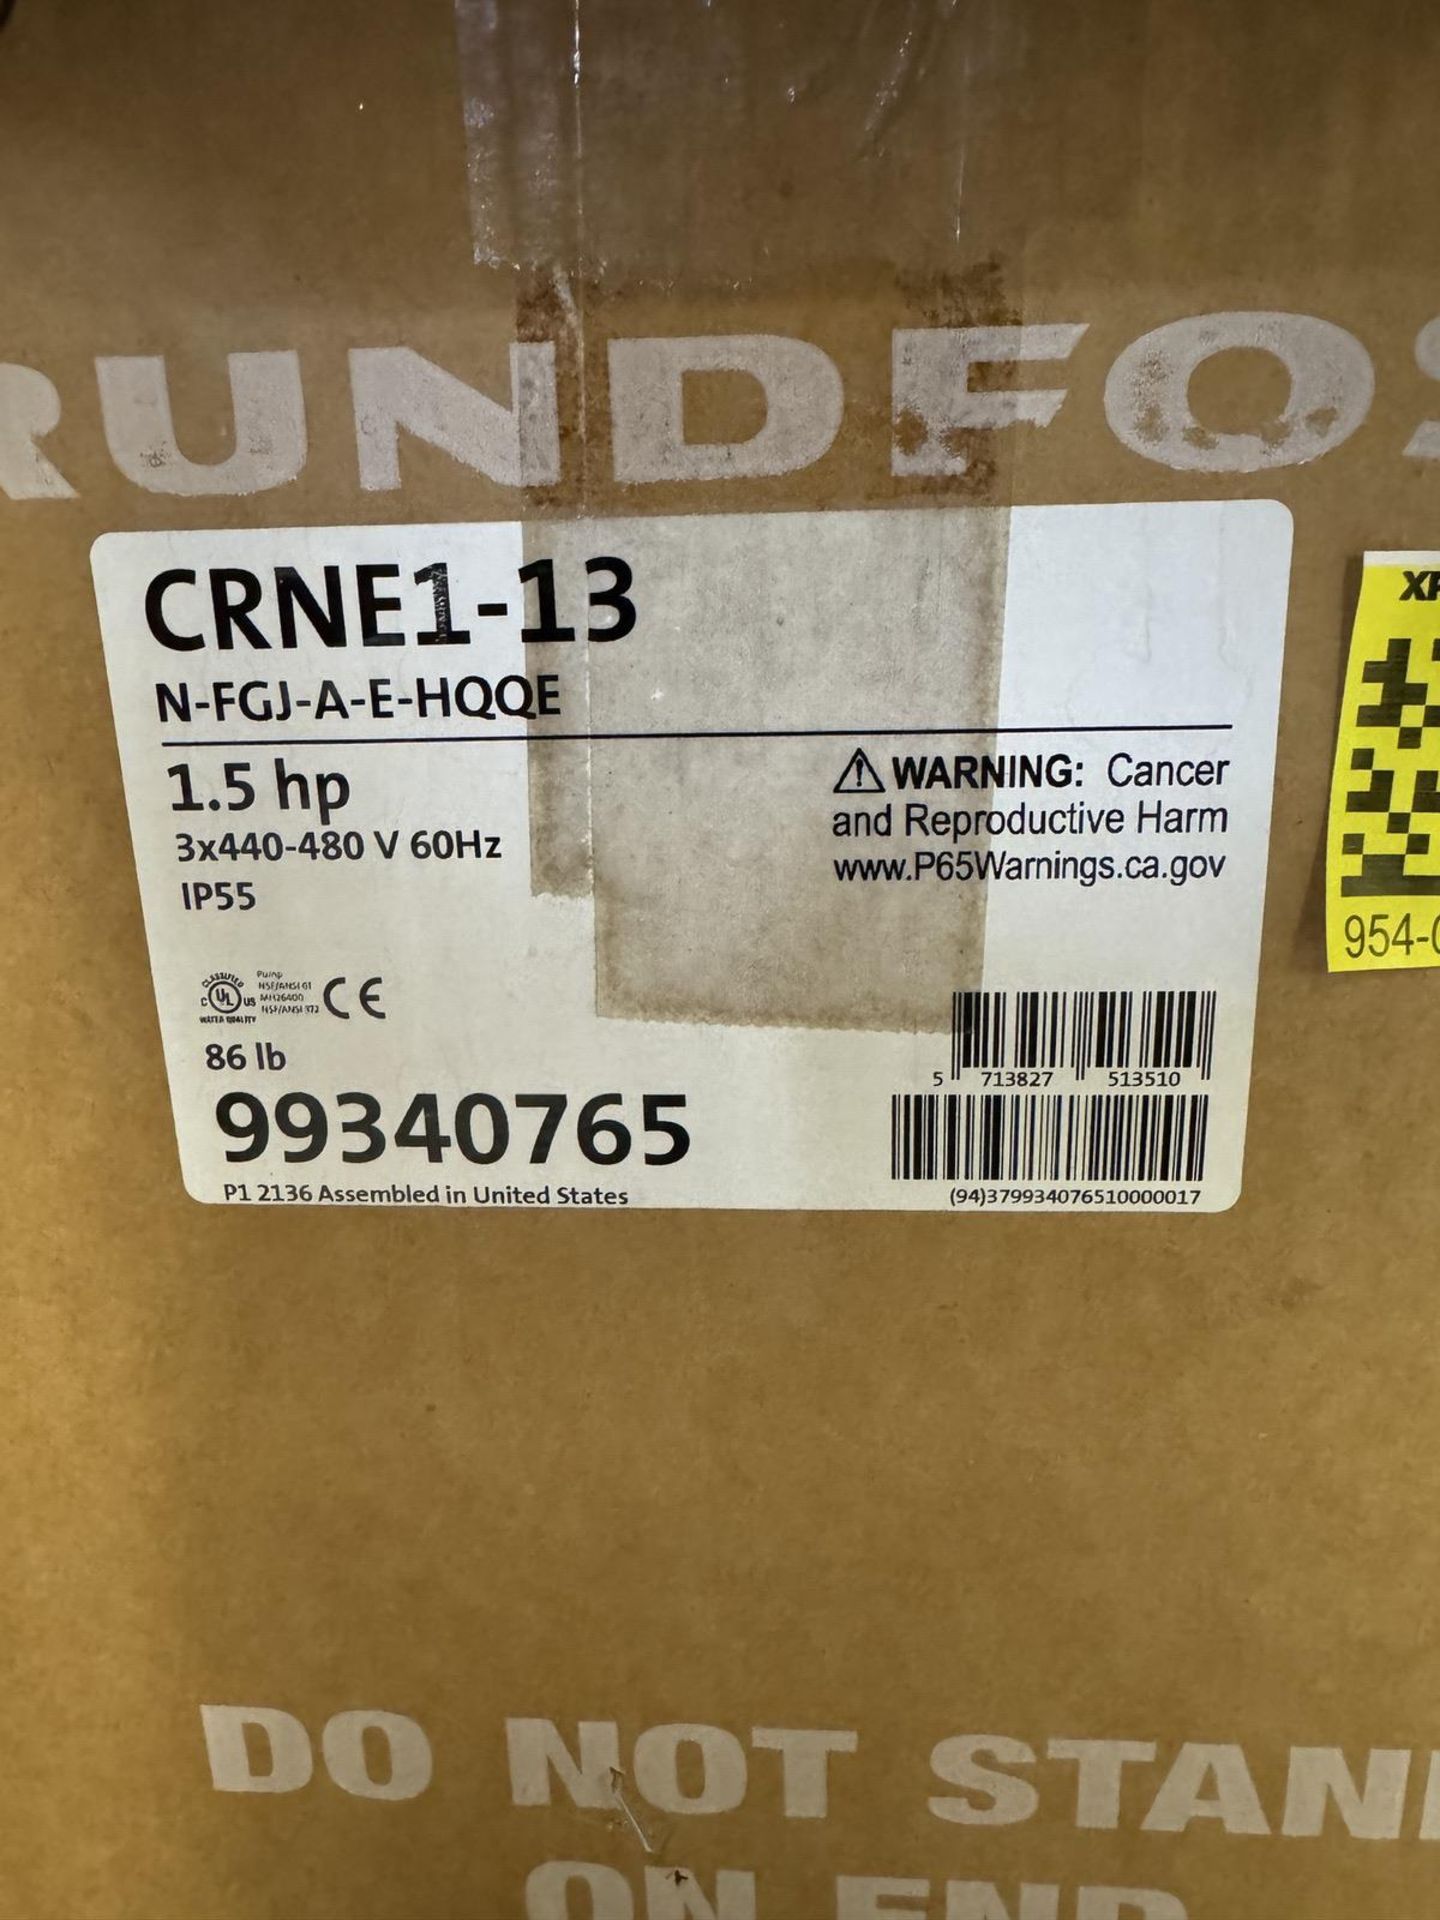 Grundfos CRNE1-13 Spare RO Loop Pump, 1.5 HP, New in Box - Image 4 of 4